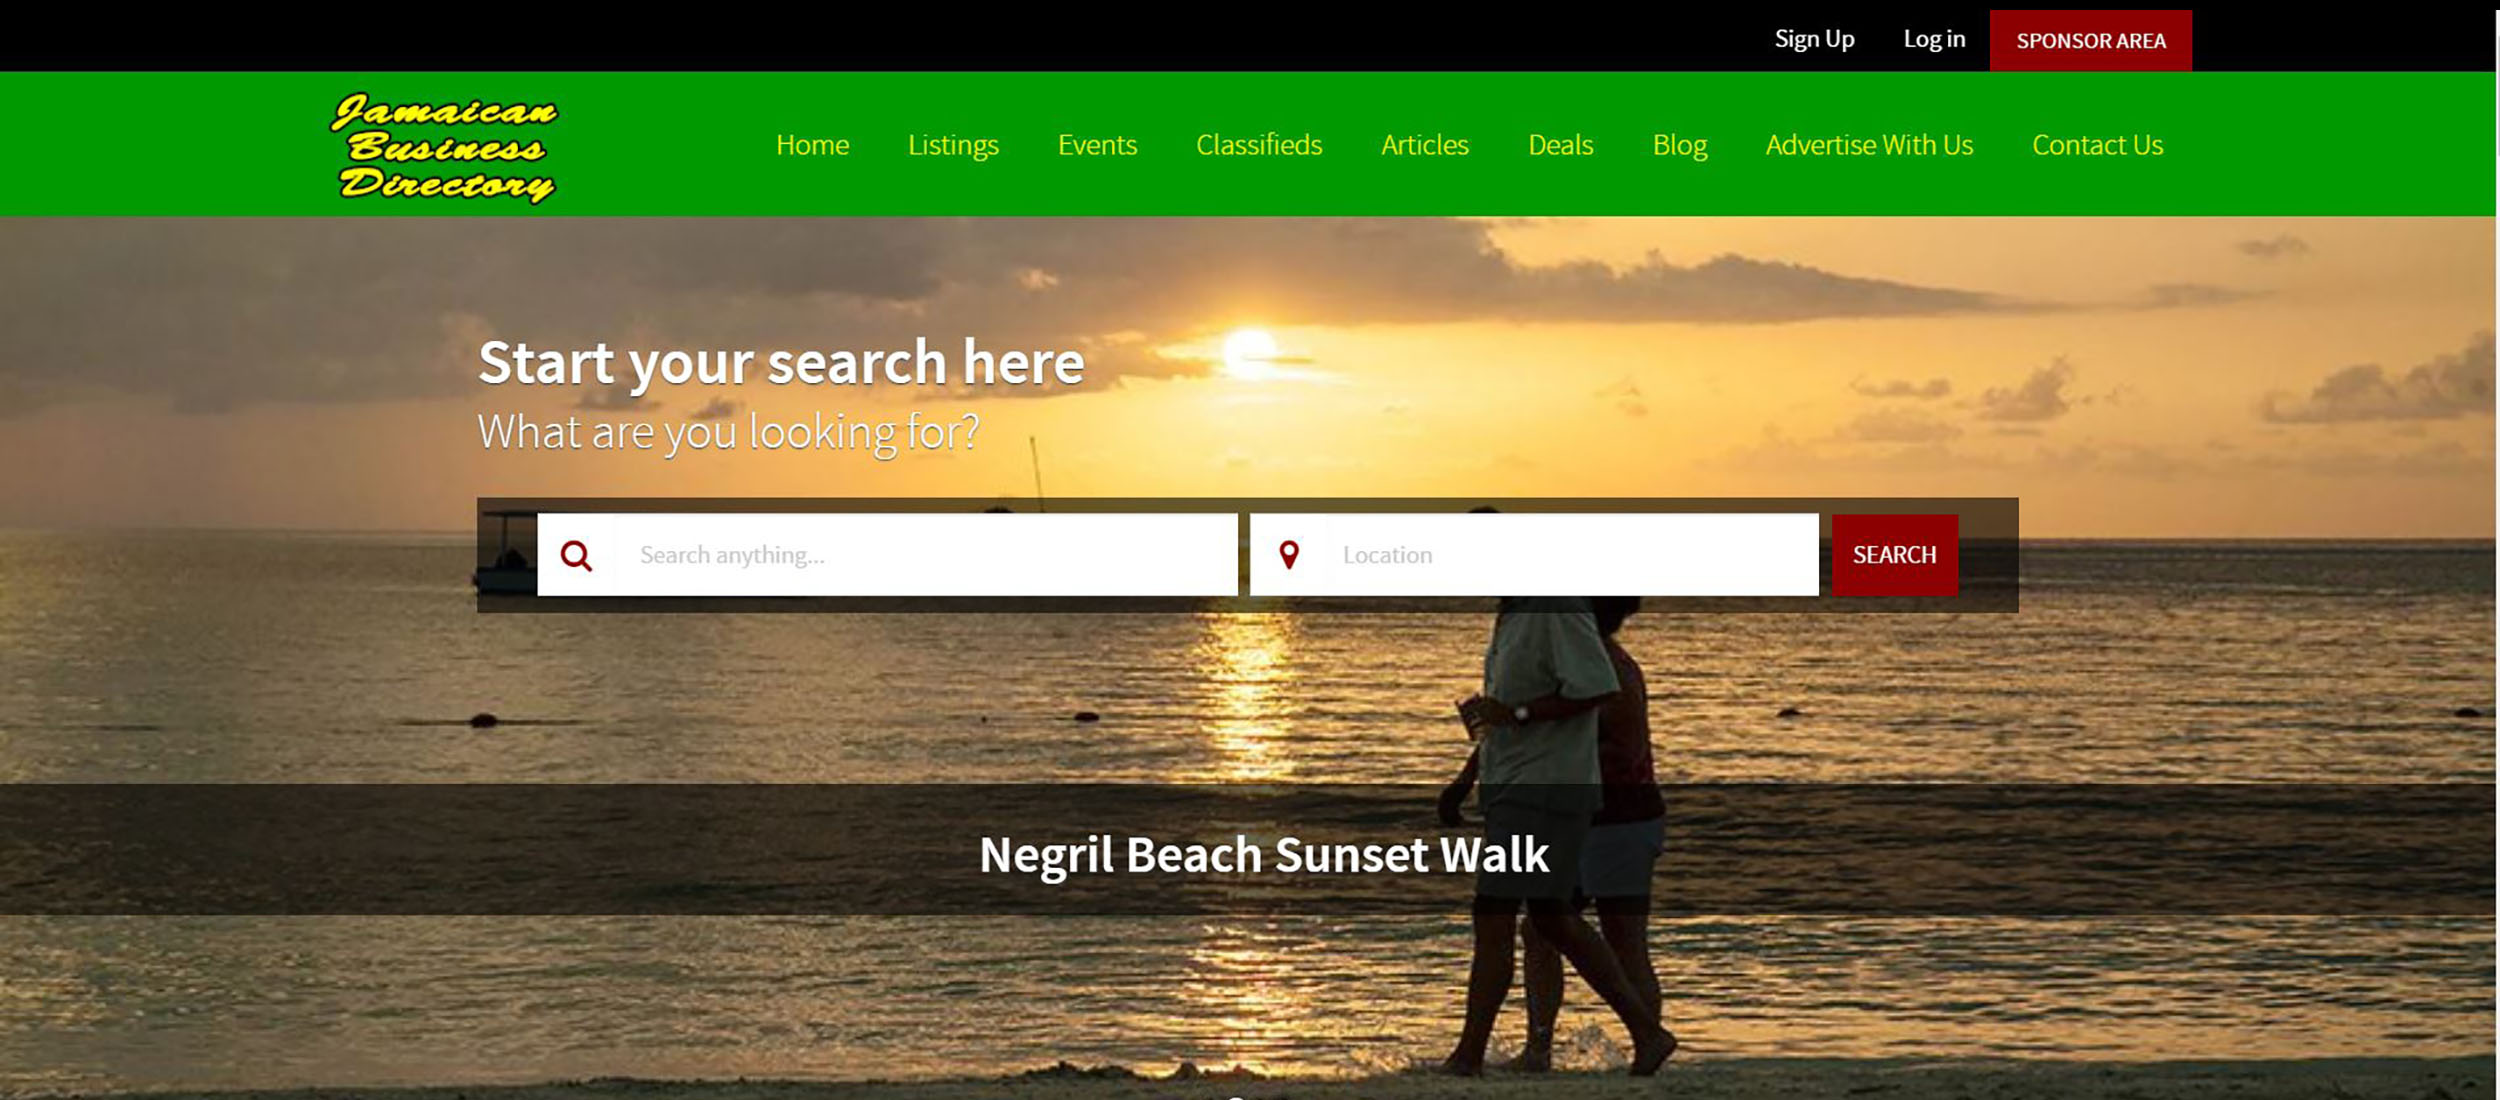 Jamaican Business Directory by the Negril Travel Guide.com - Barry J. Hough Sr.